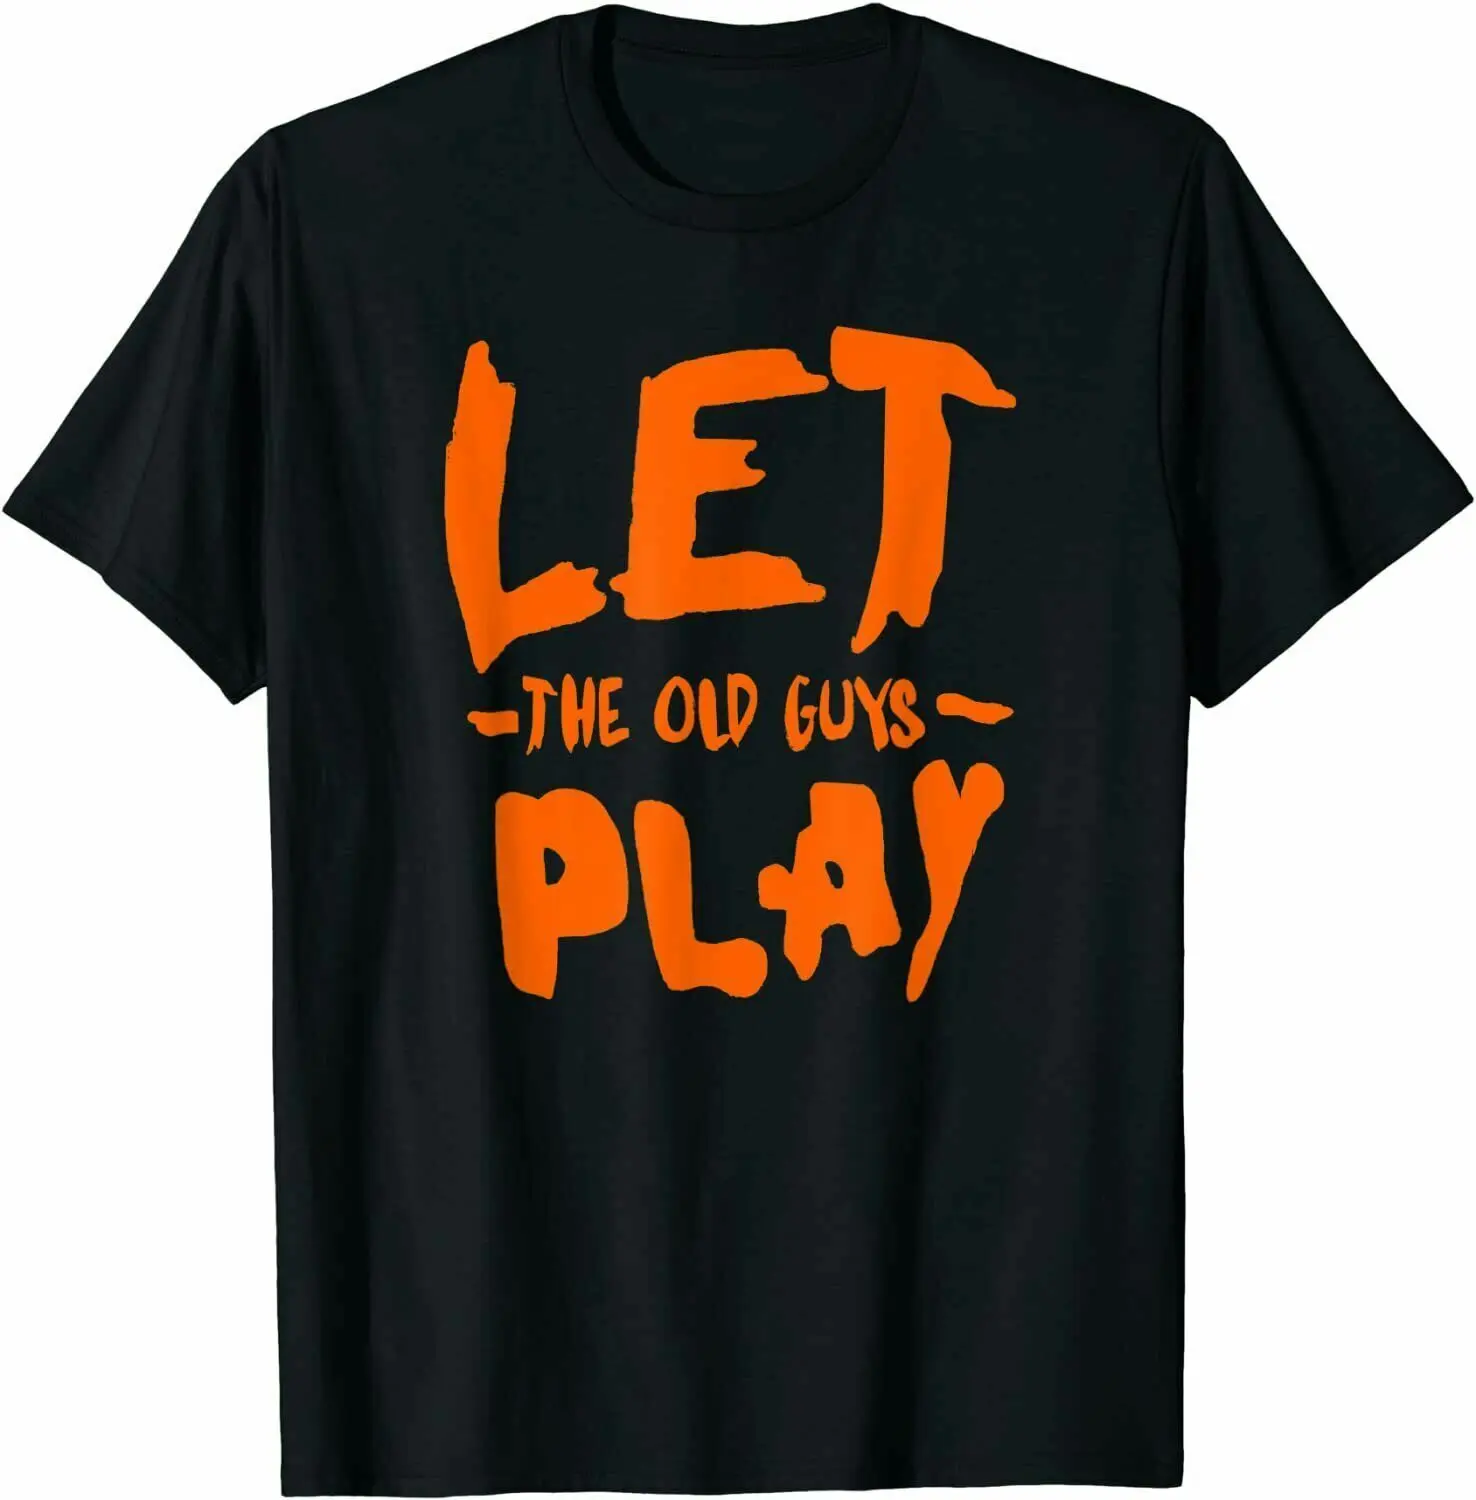 

Let The Old Guys Play Brandon Crawford Giants Crewneck Cotton T Shirt Men Casual Short Sleeve Tees Tops Dropshipping